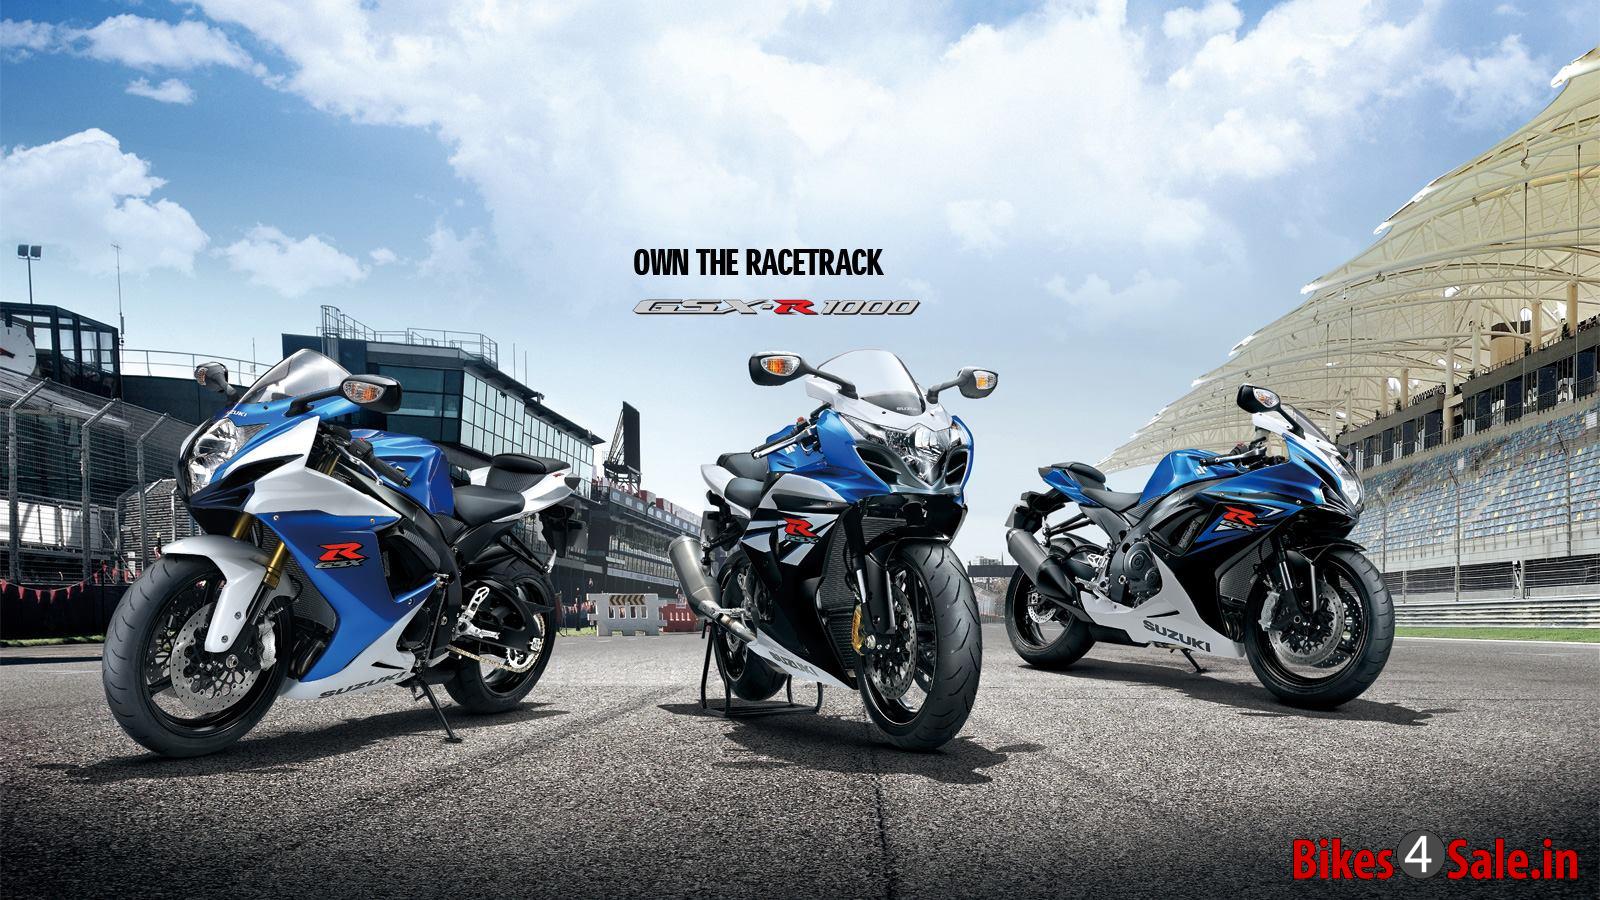 Suzuki GSX R1000 - Own the race track with the New GSXR1000